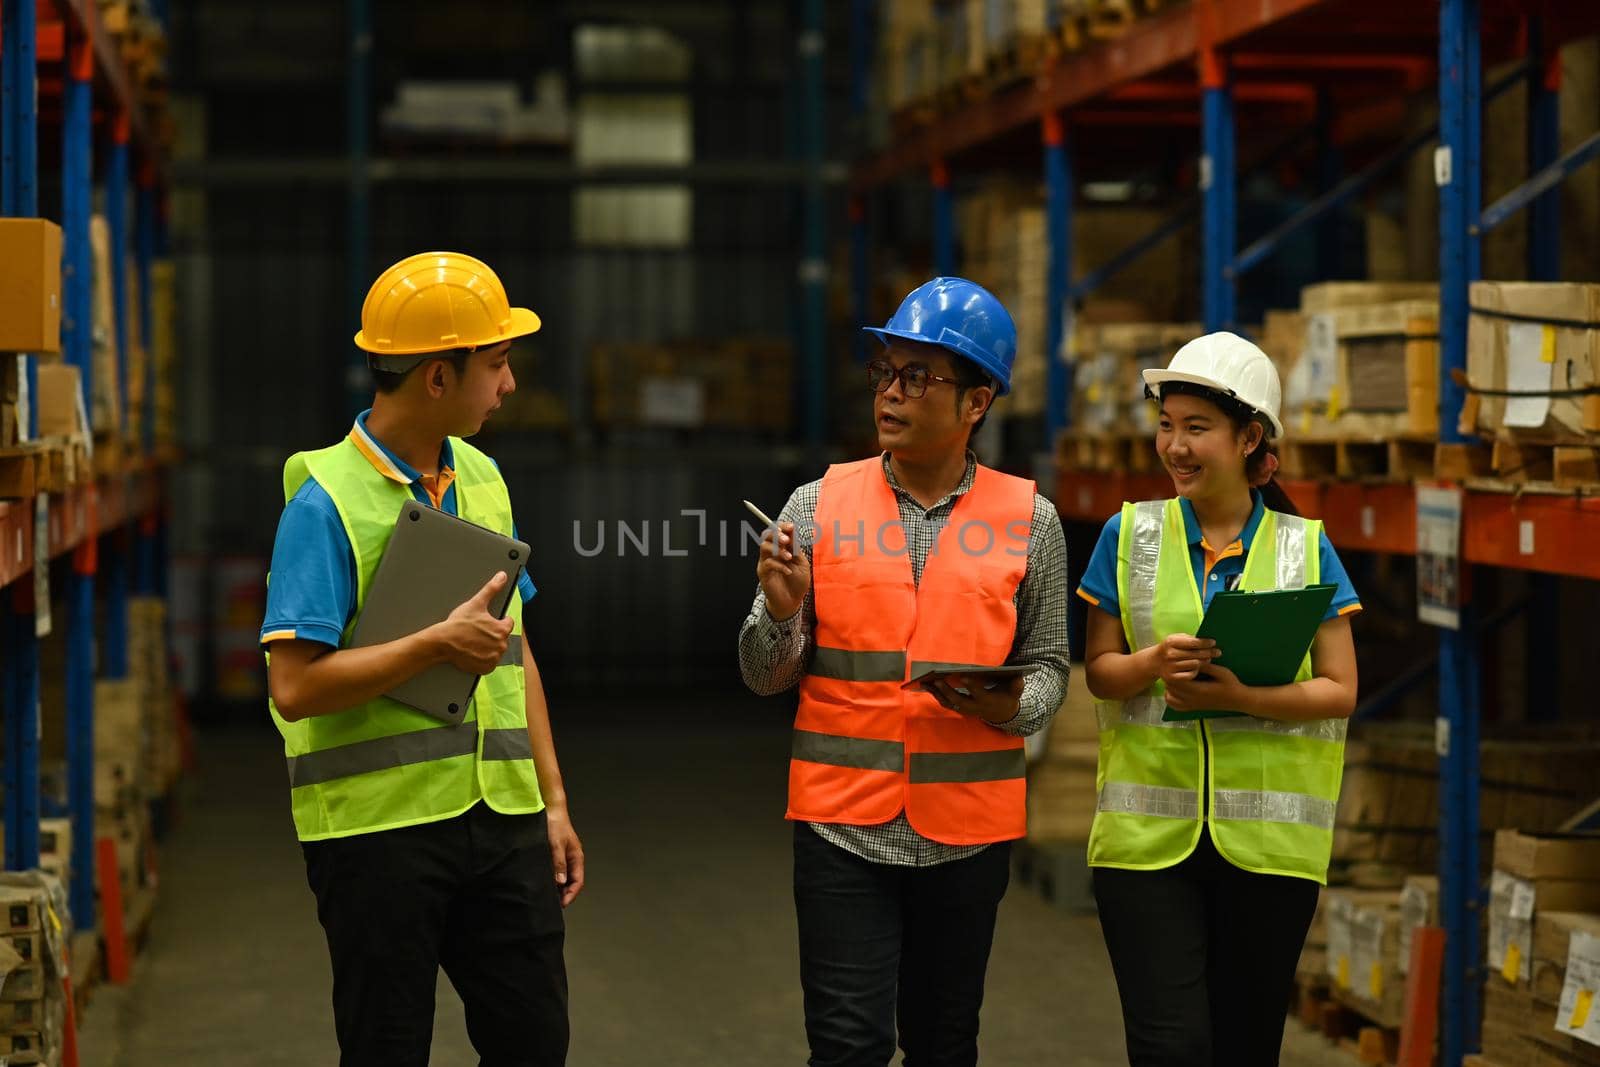 Mature male manager and workers in hardhats and reflective jackets checking quantity of storage product on shelf in a large warehouse.